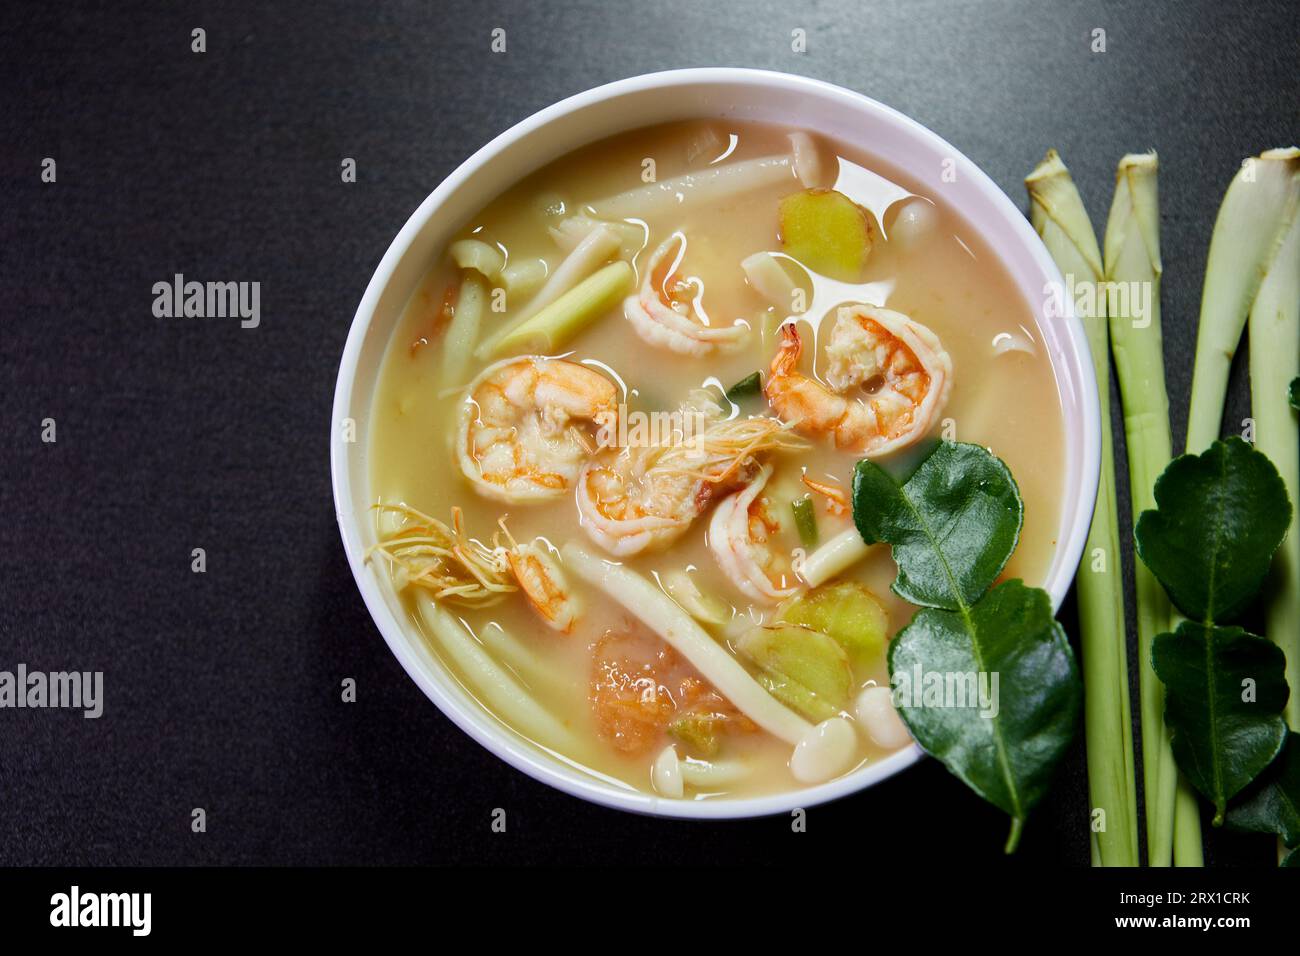 Tom Yum Goong Spicy and Sour Thai Food in una ciotola Foto Stock